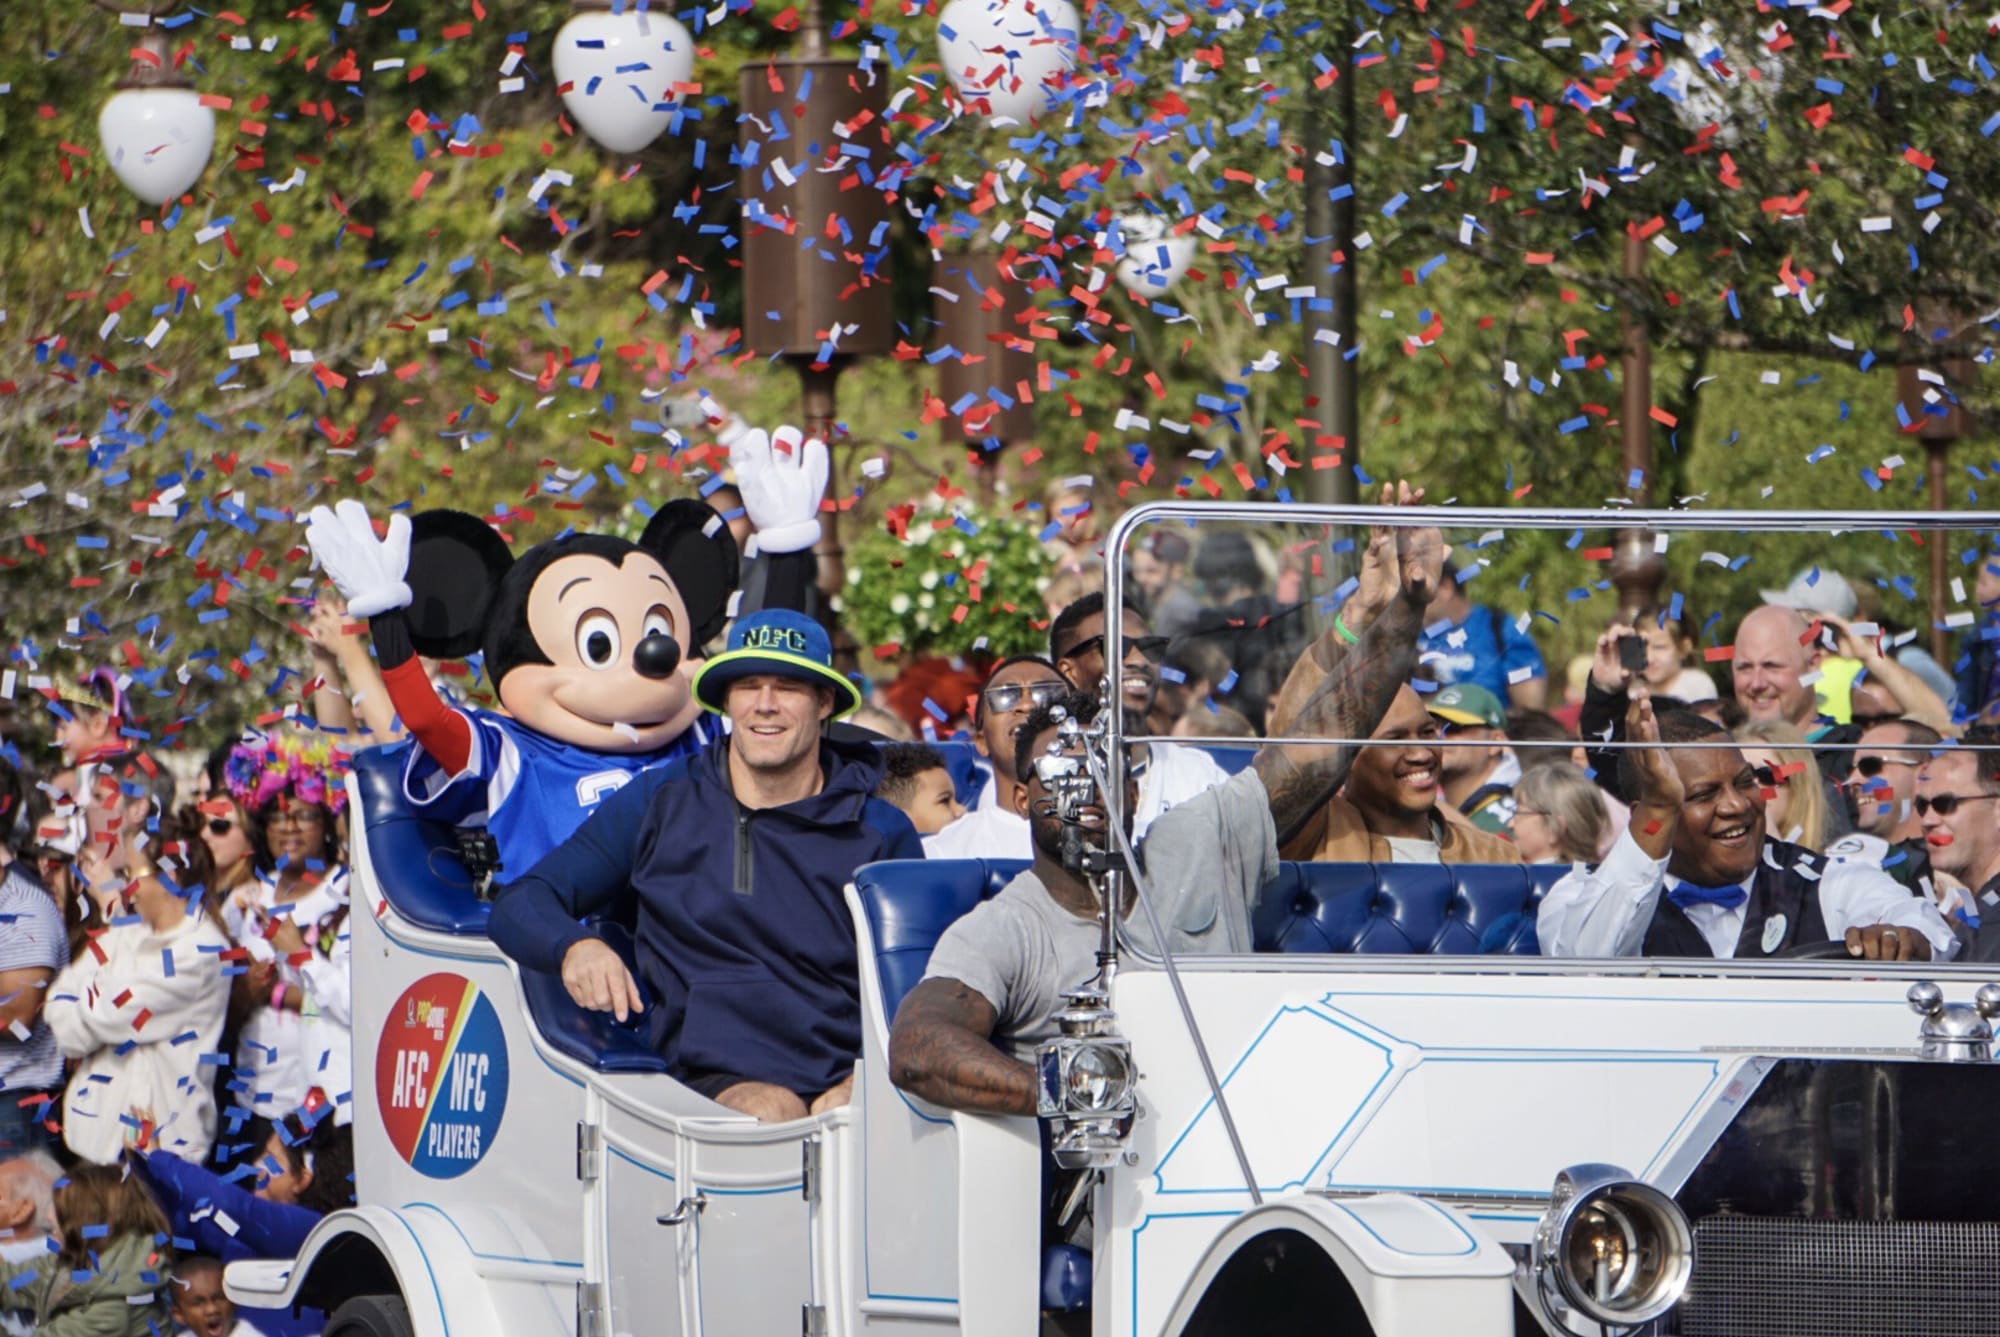 NFL Pro Bowl Players In Disney Parade Capping Off Pro Bowl Week